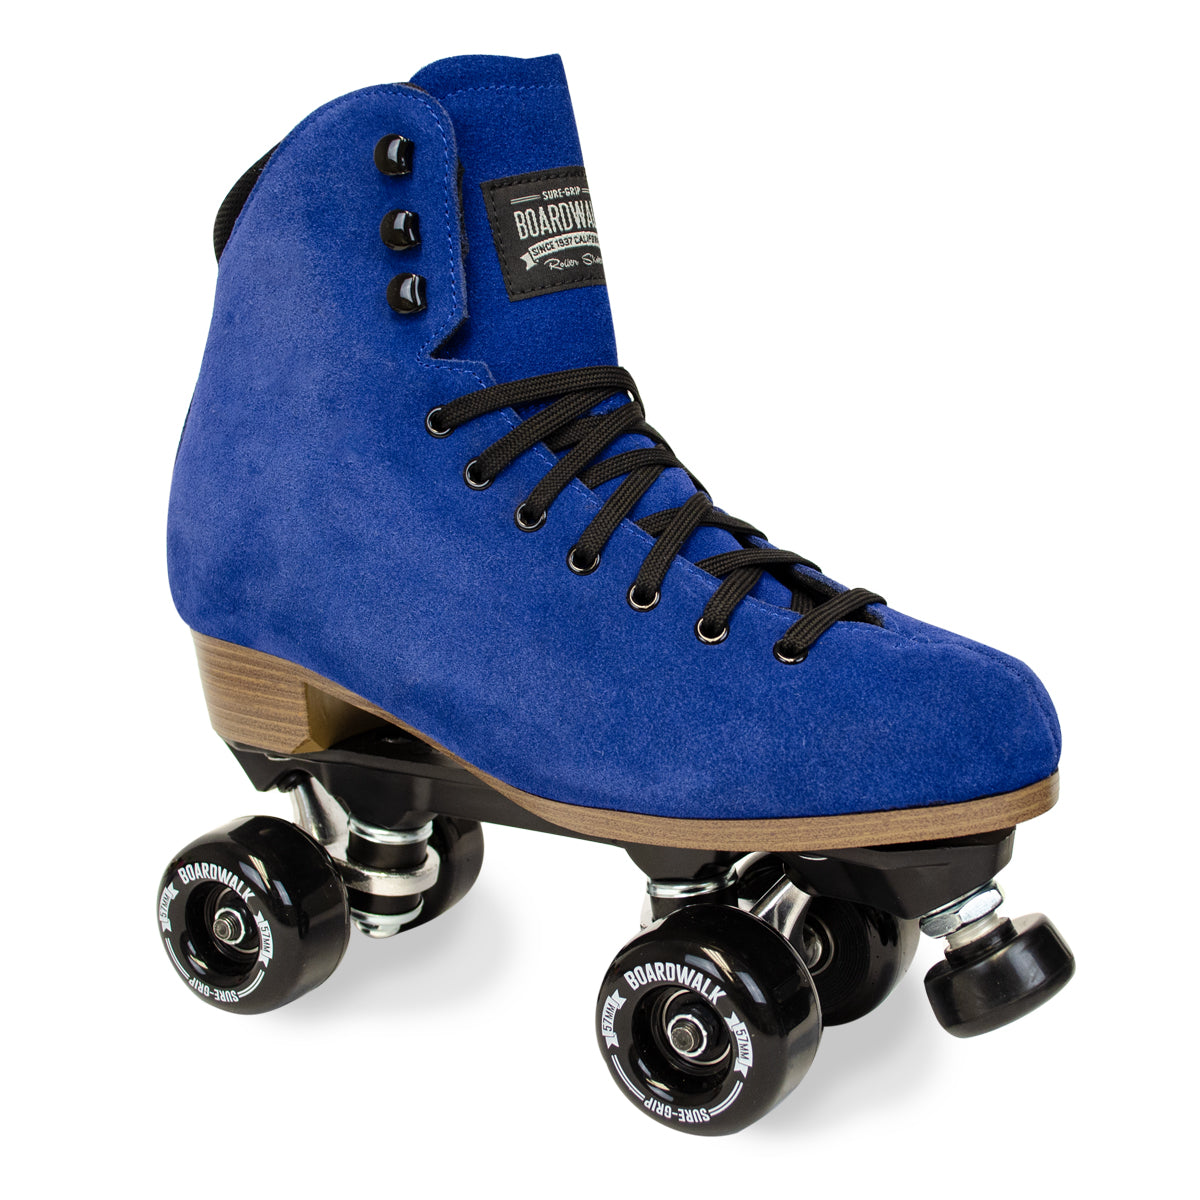  Sure-Grip Fame Men & Women Premium Roller Skates Black  Leatherette  Stylish Skates for Indoors - Double Structure, Stronger Grip,  Extra Long Laces - Suitable for Beginners : Sports & Outdoors